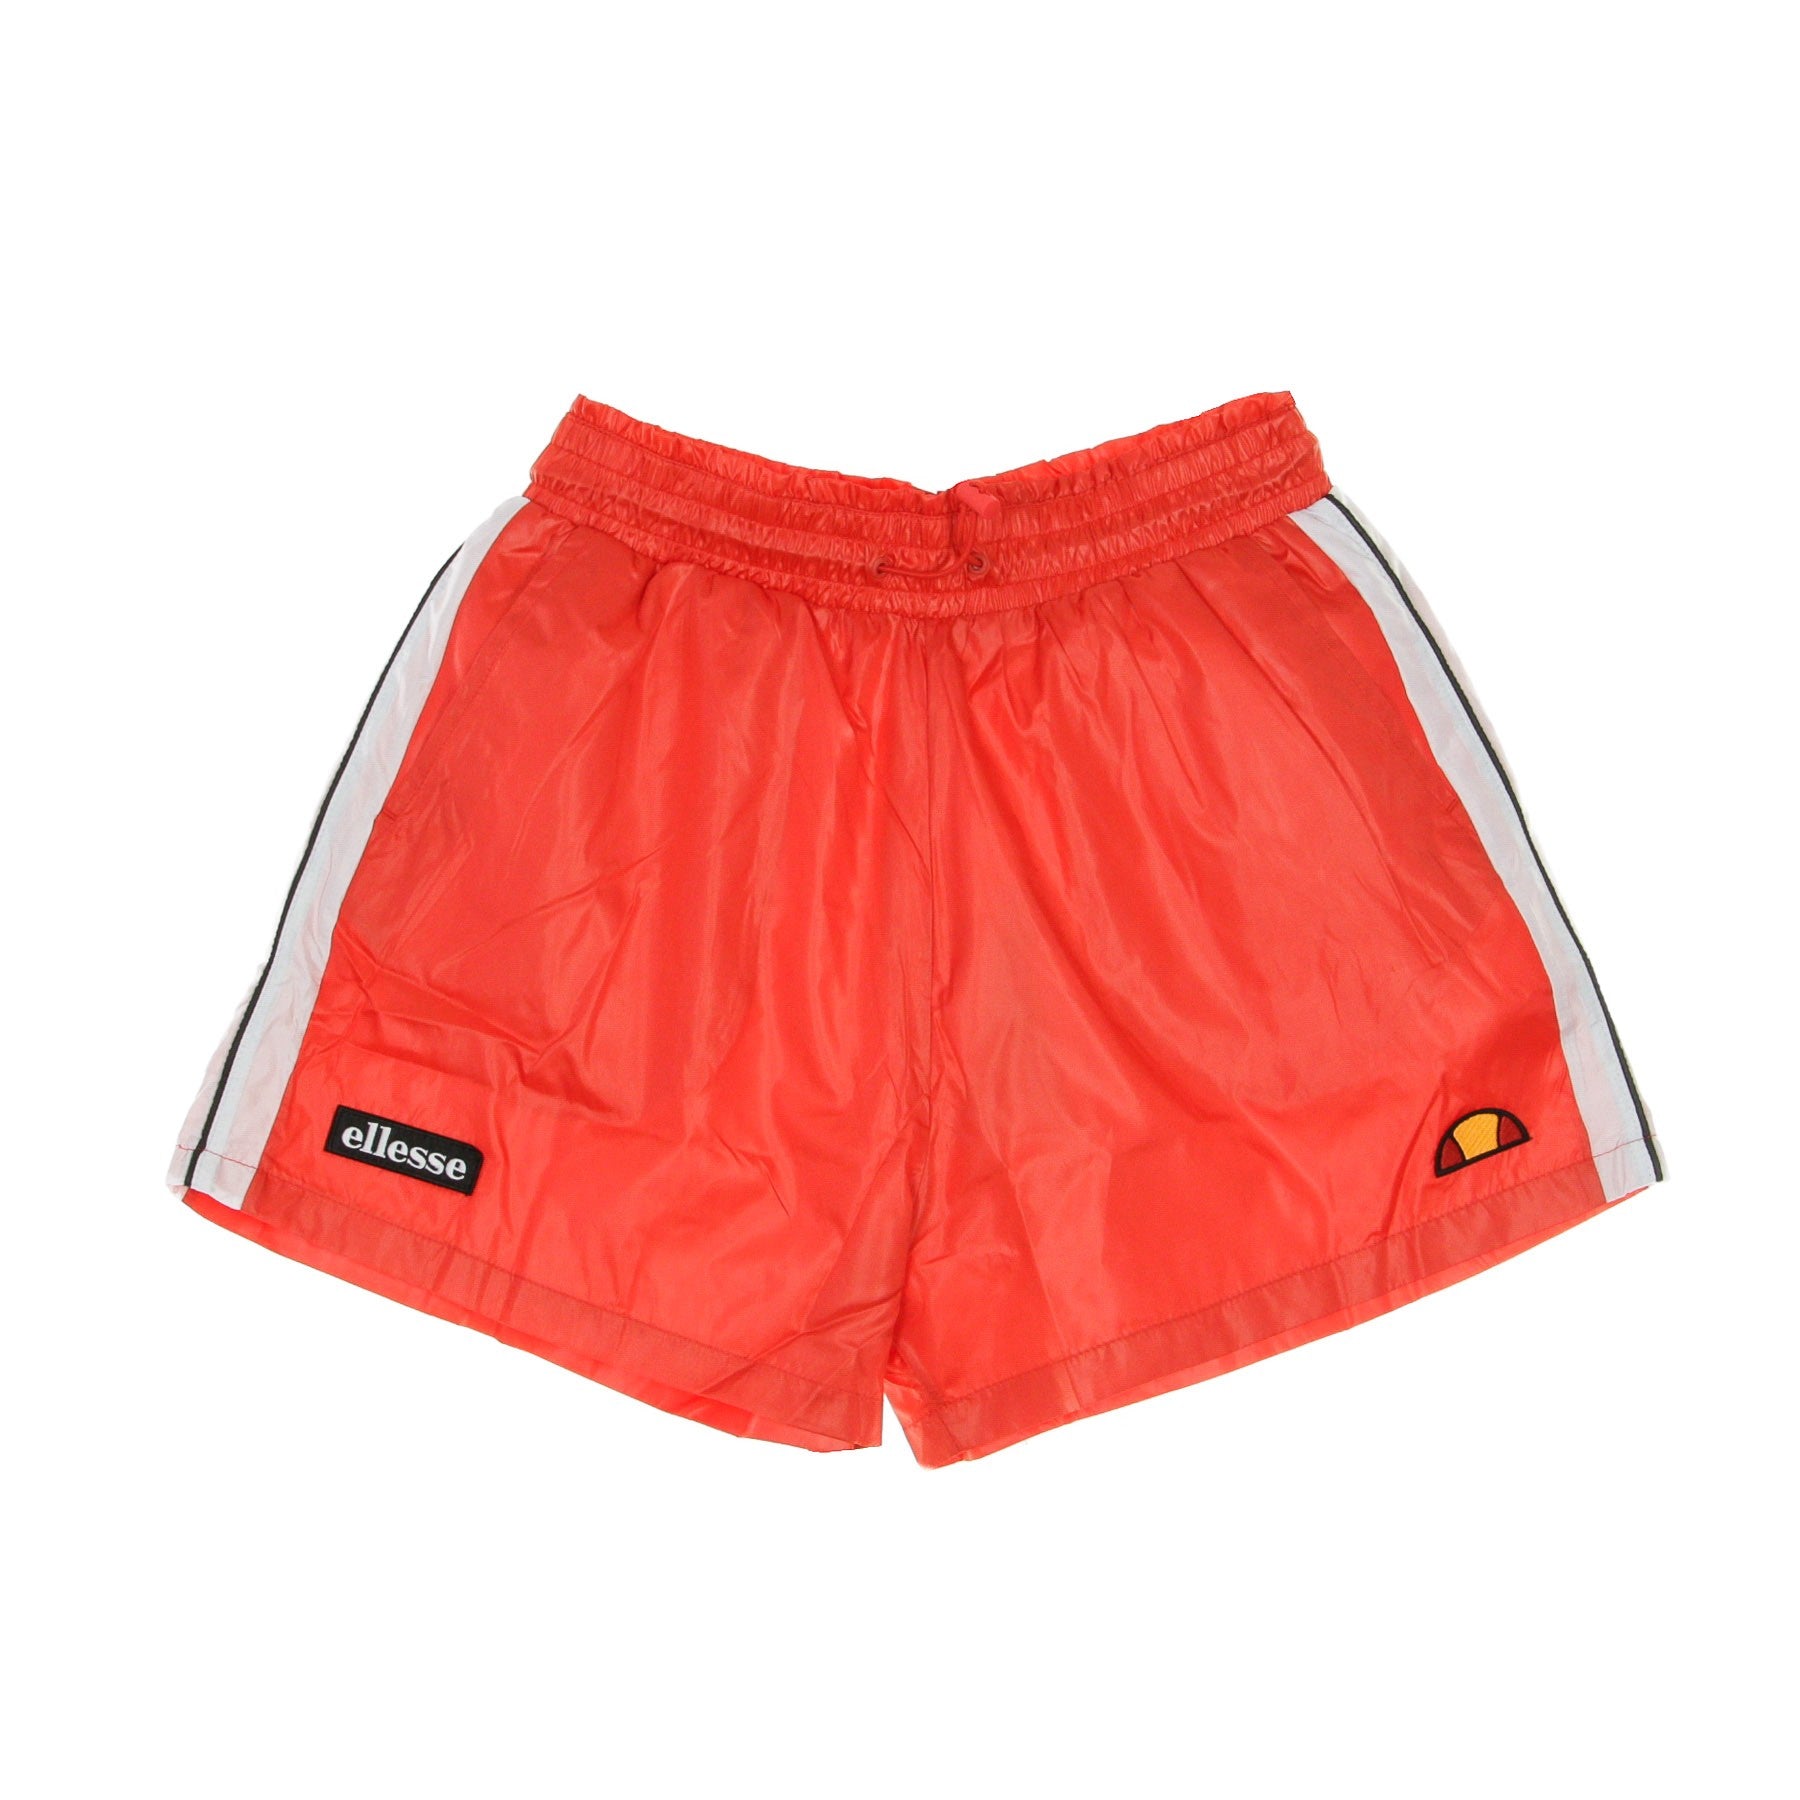 Ellesse, Pantaloncino Donna Short, Fiery Red